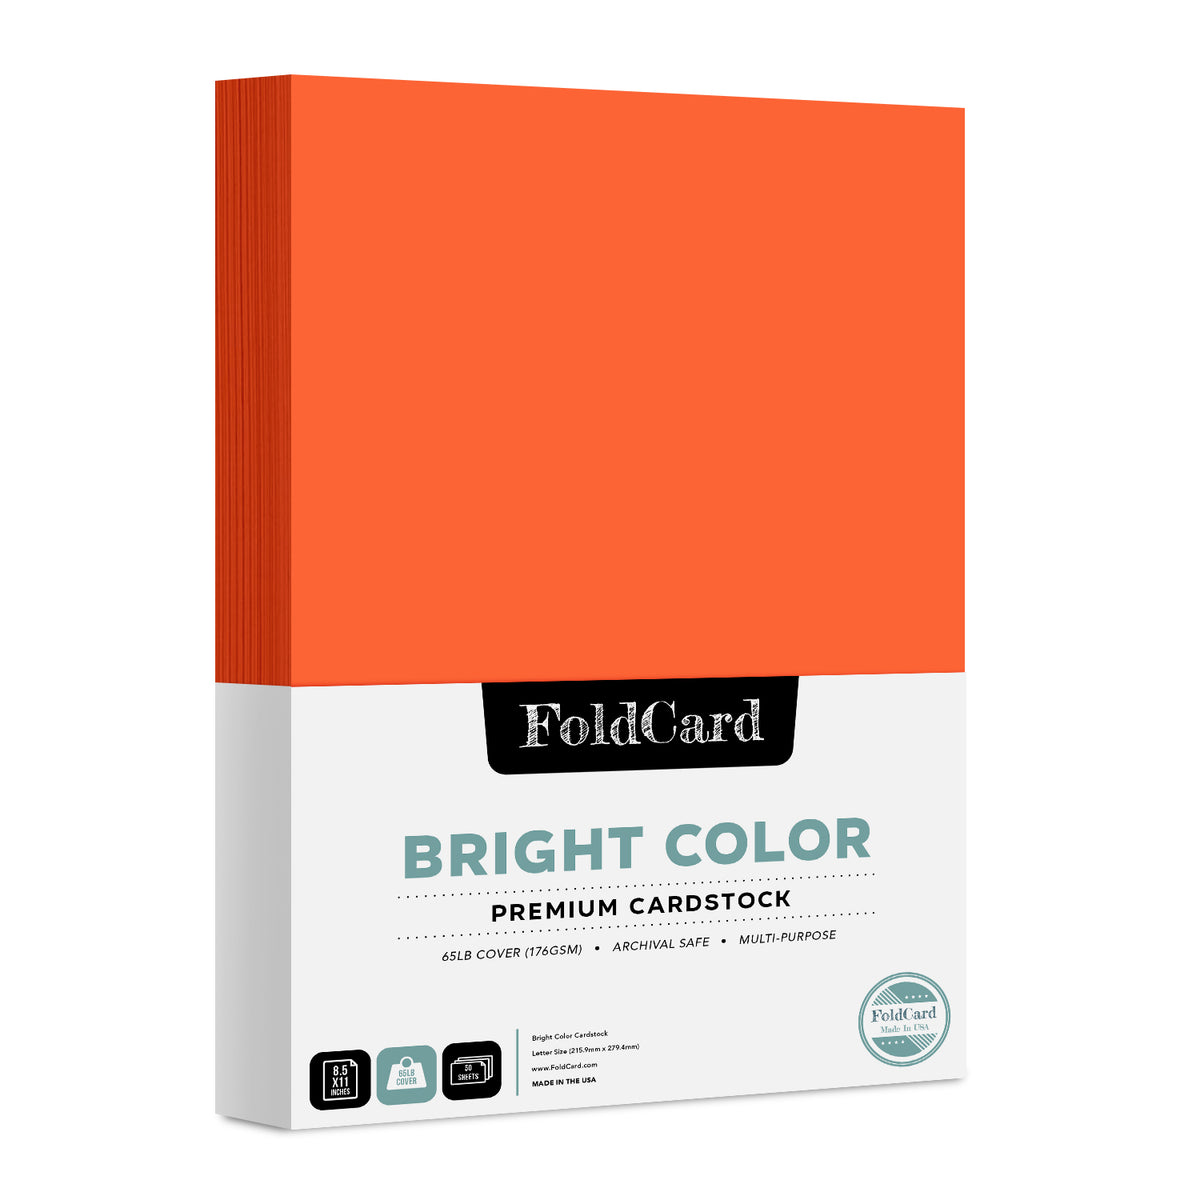 FoldCard: Where you can find Quality card supplies at affordable price